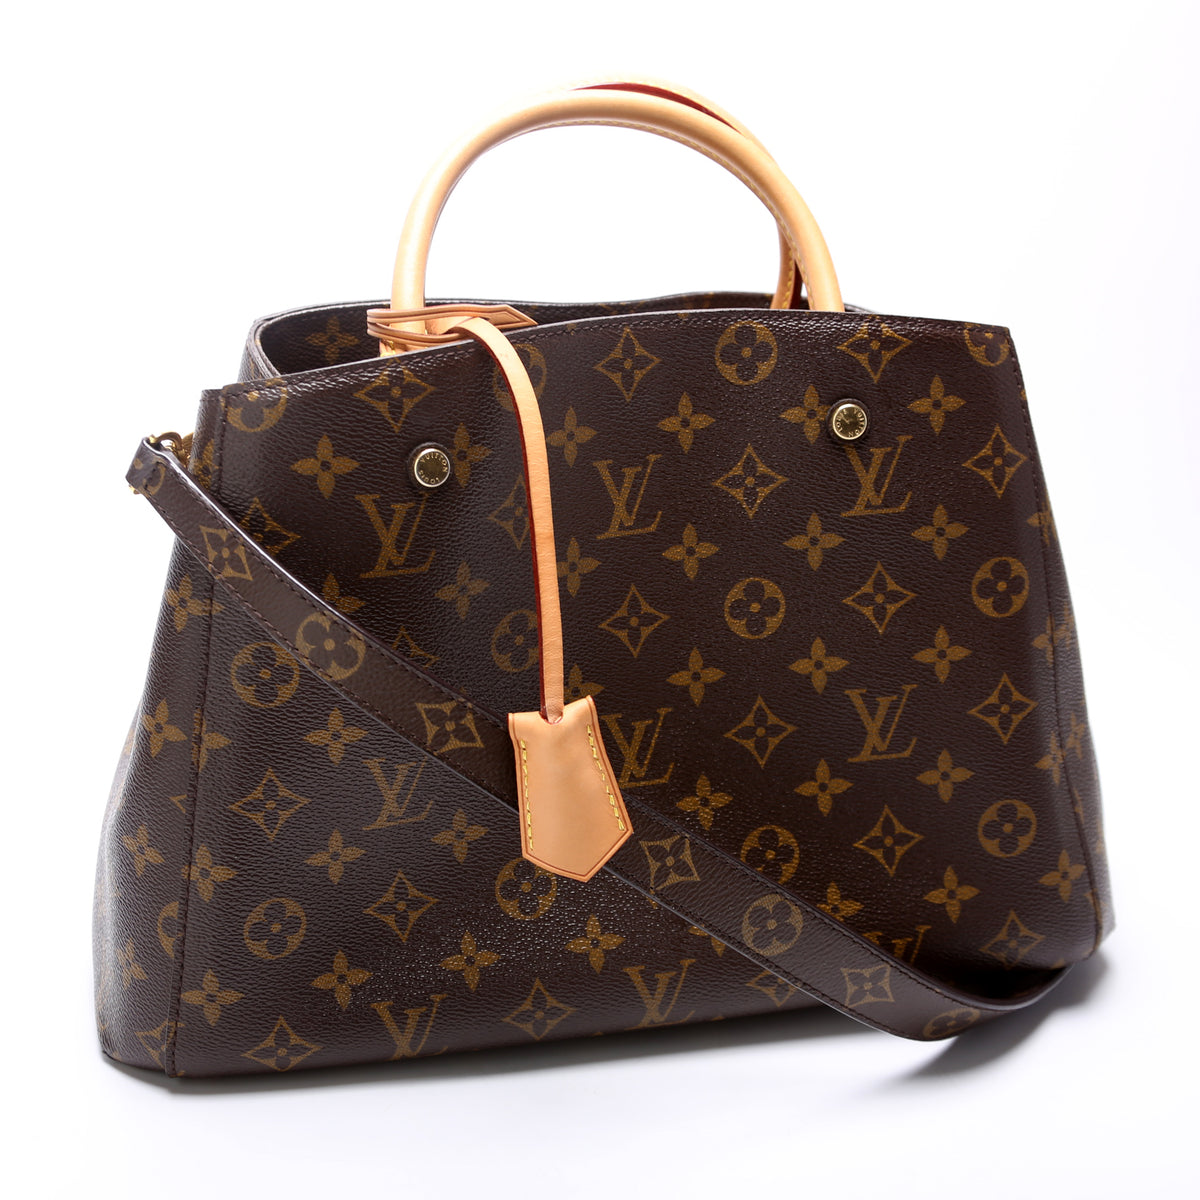 Louis Vuitton - Authenticated Montaigne Handbag - Leather Brown for Women, Very Good Condition